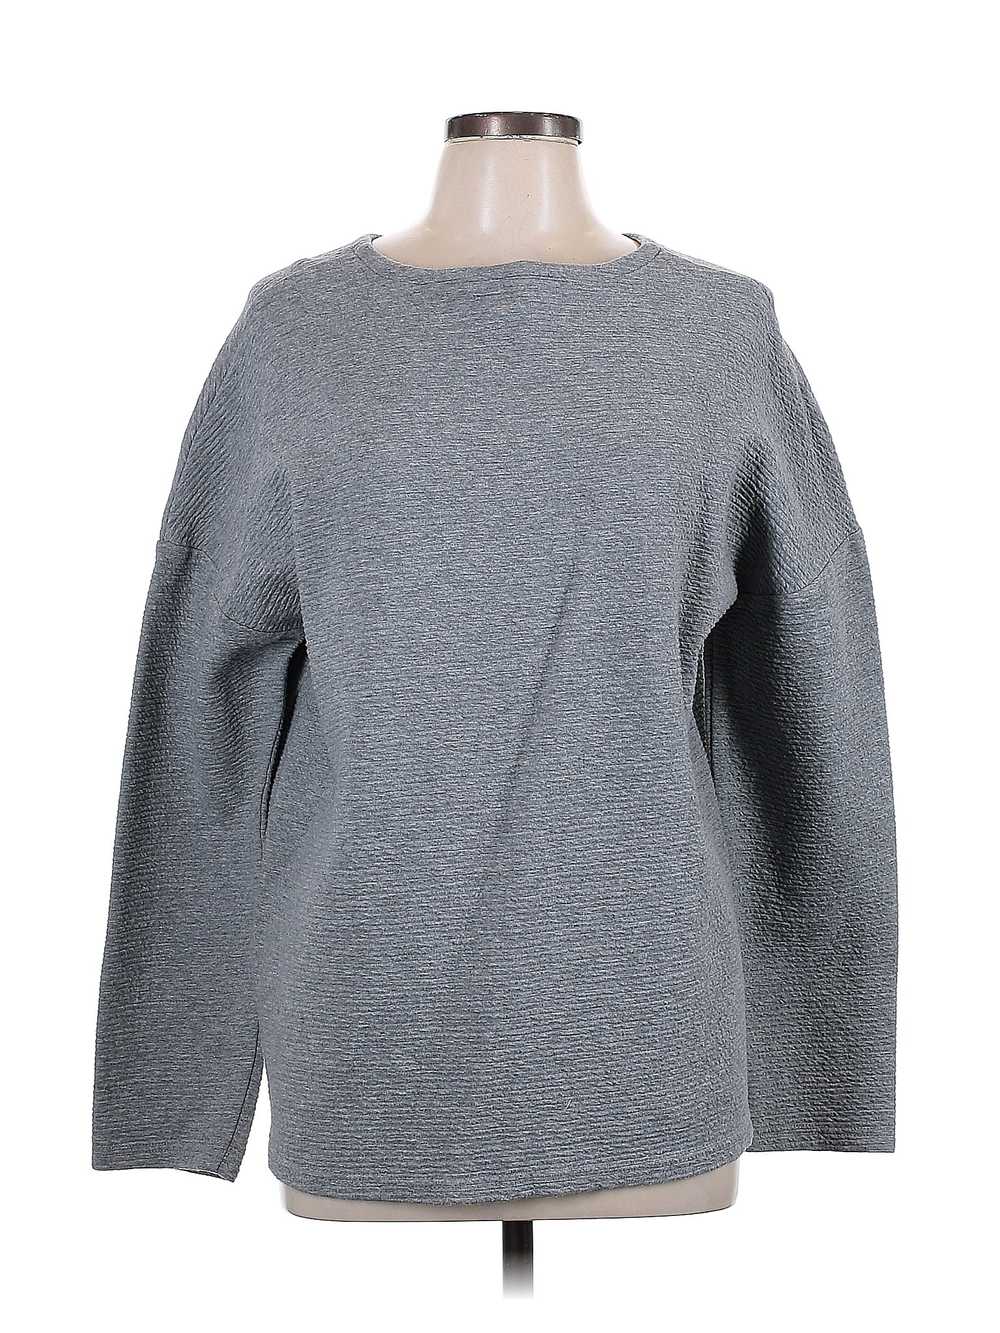 Athletic Works Women Gray Pullover Sweater L - image 1